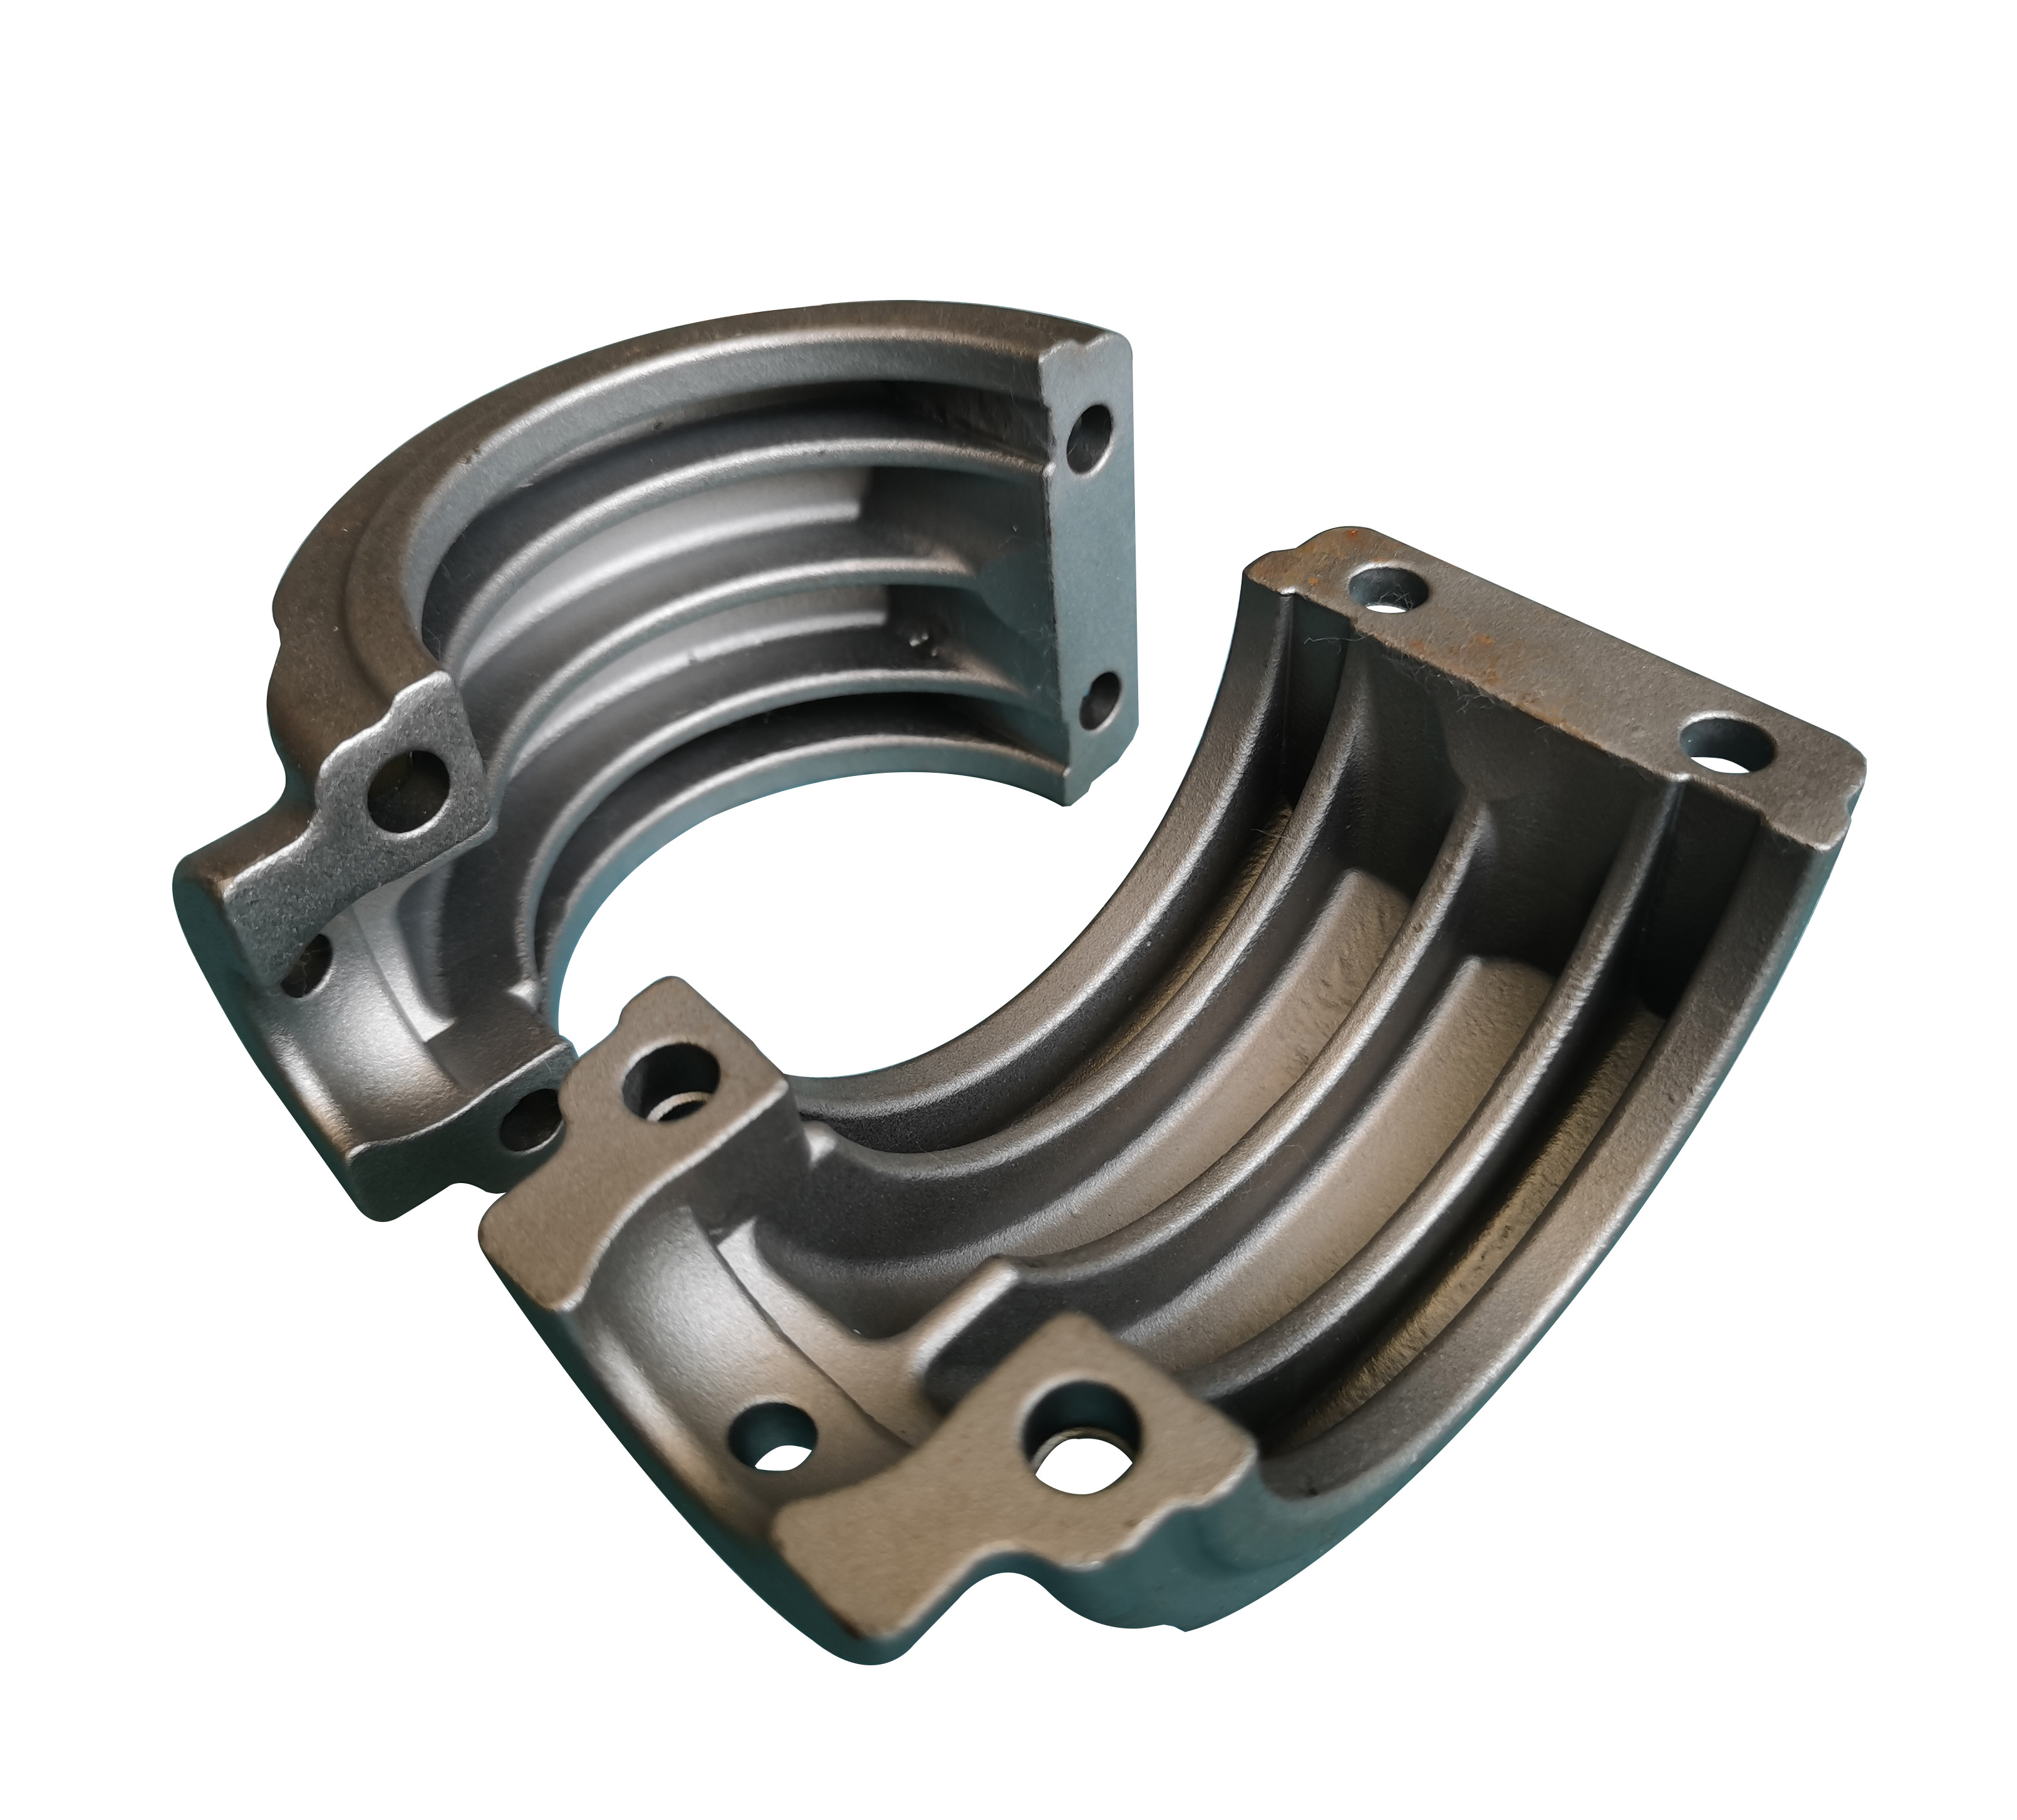 Stainless steel mechanical fastener casting part